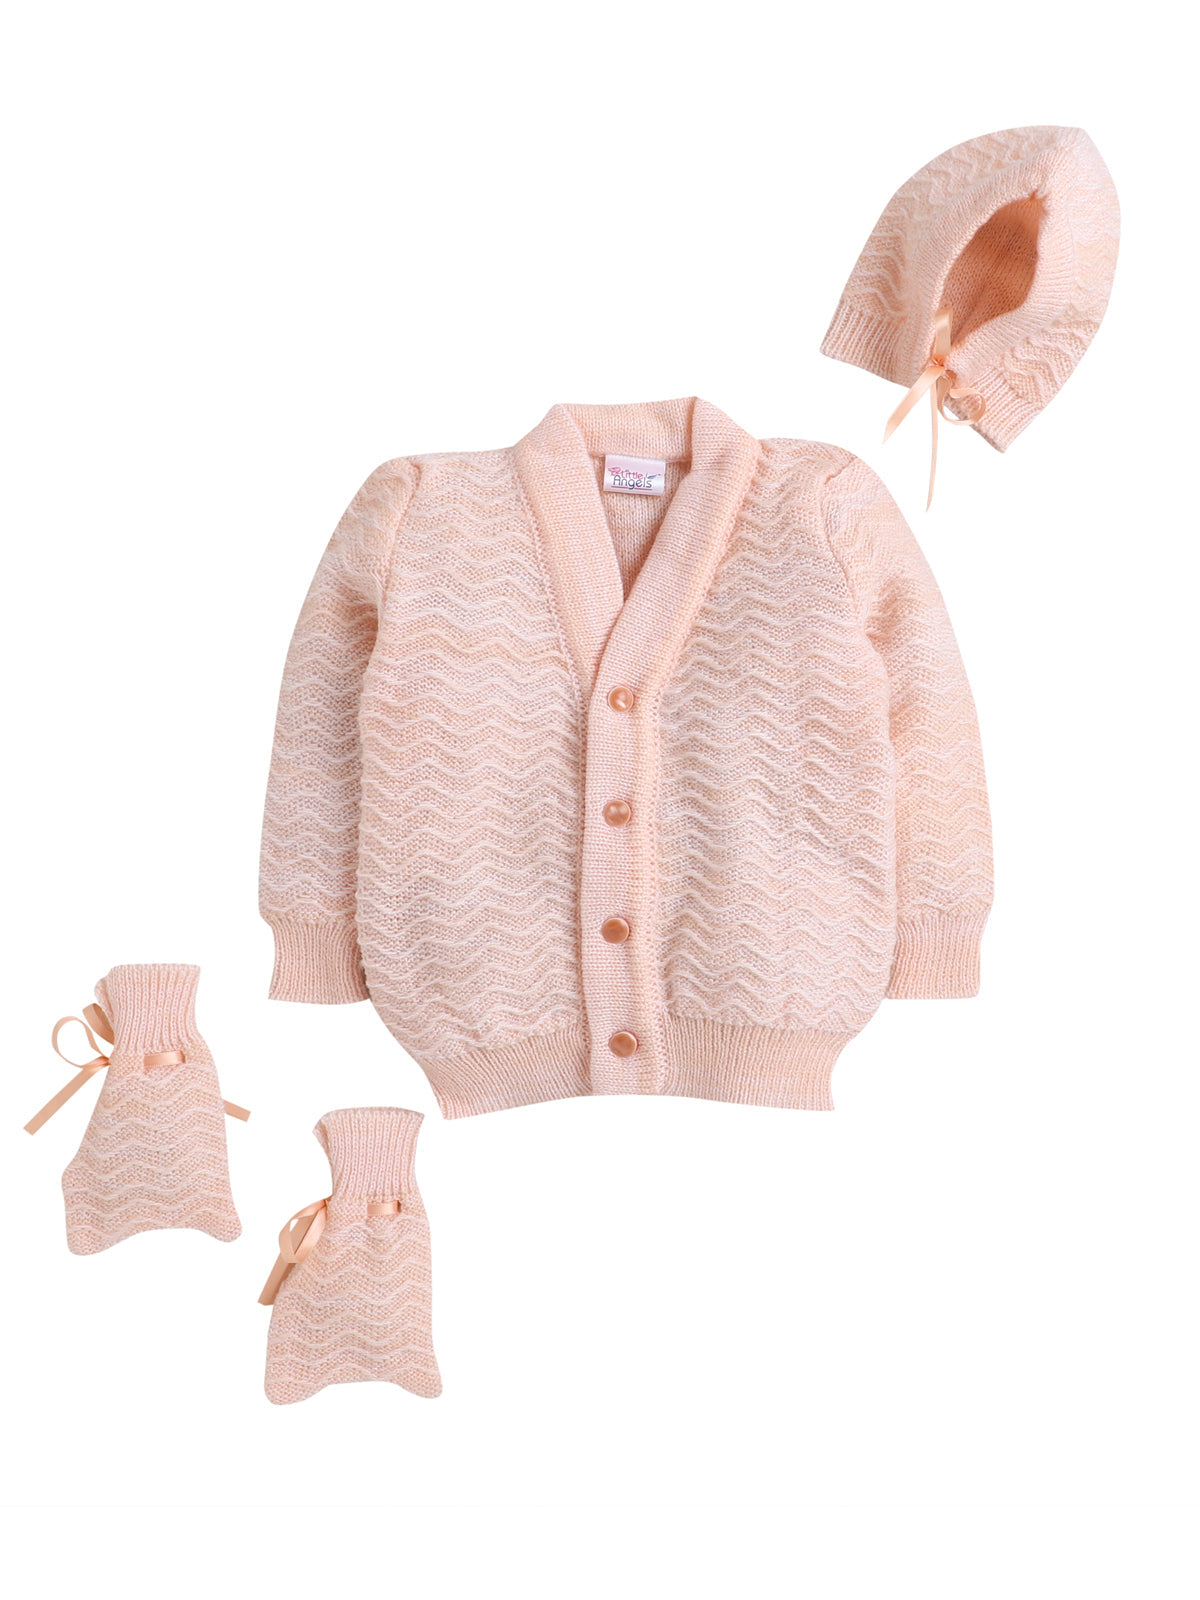 Peach Color Zig-zag crayon pattern sweater set with matching caps and socks